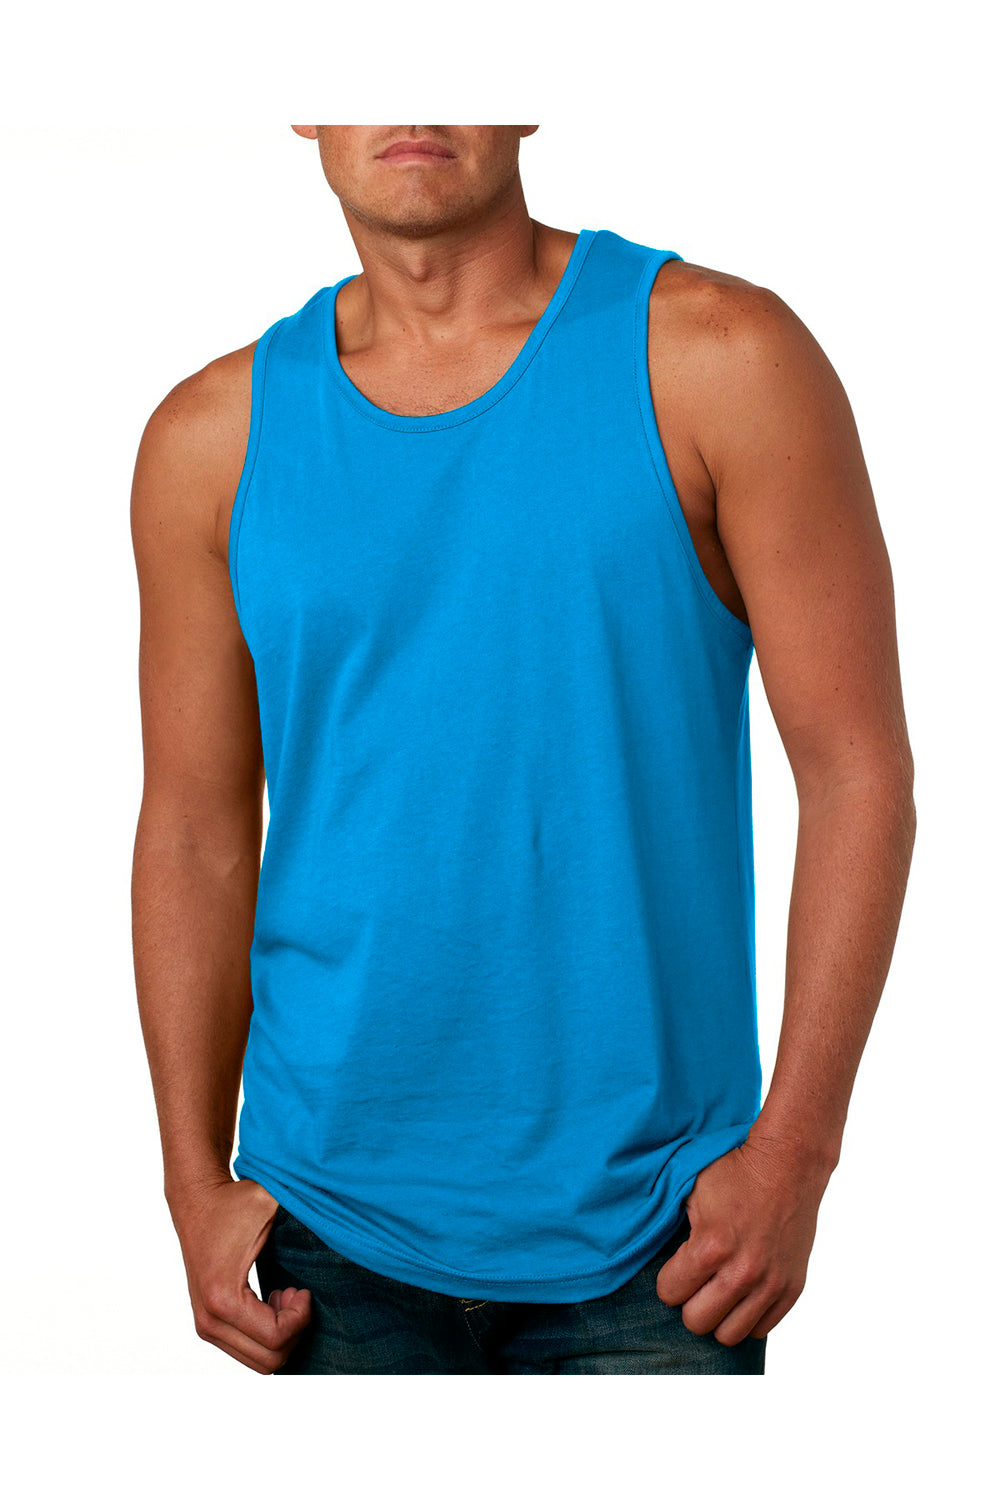 Next Level 3633 Mens Tank Top Turquoise Blue Front